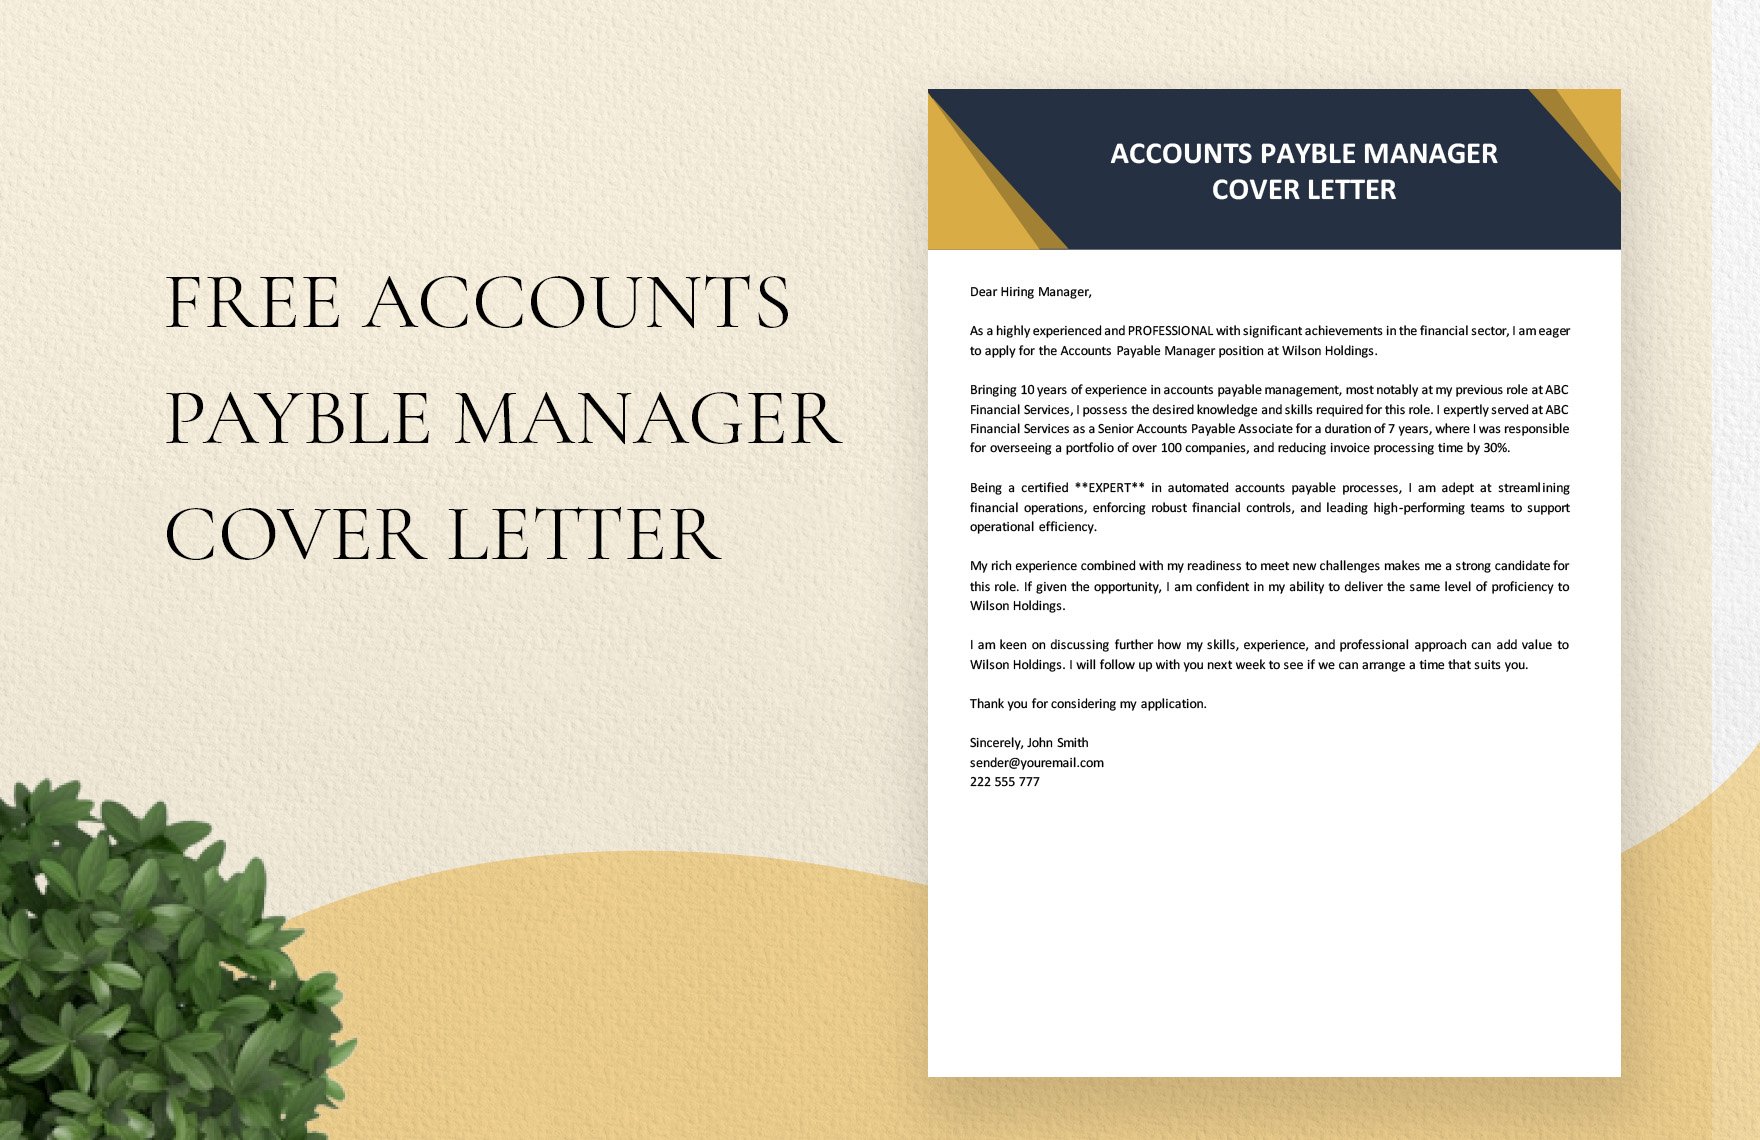 Accounts Payable Manager Cover Letter